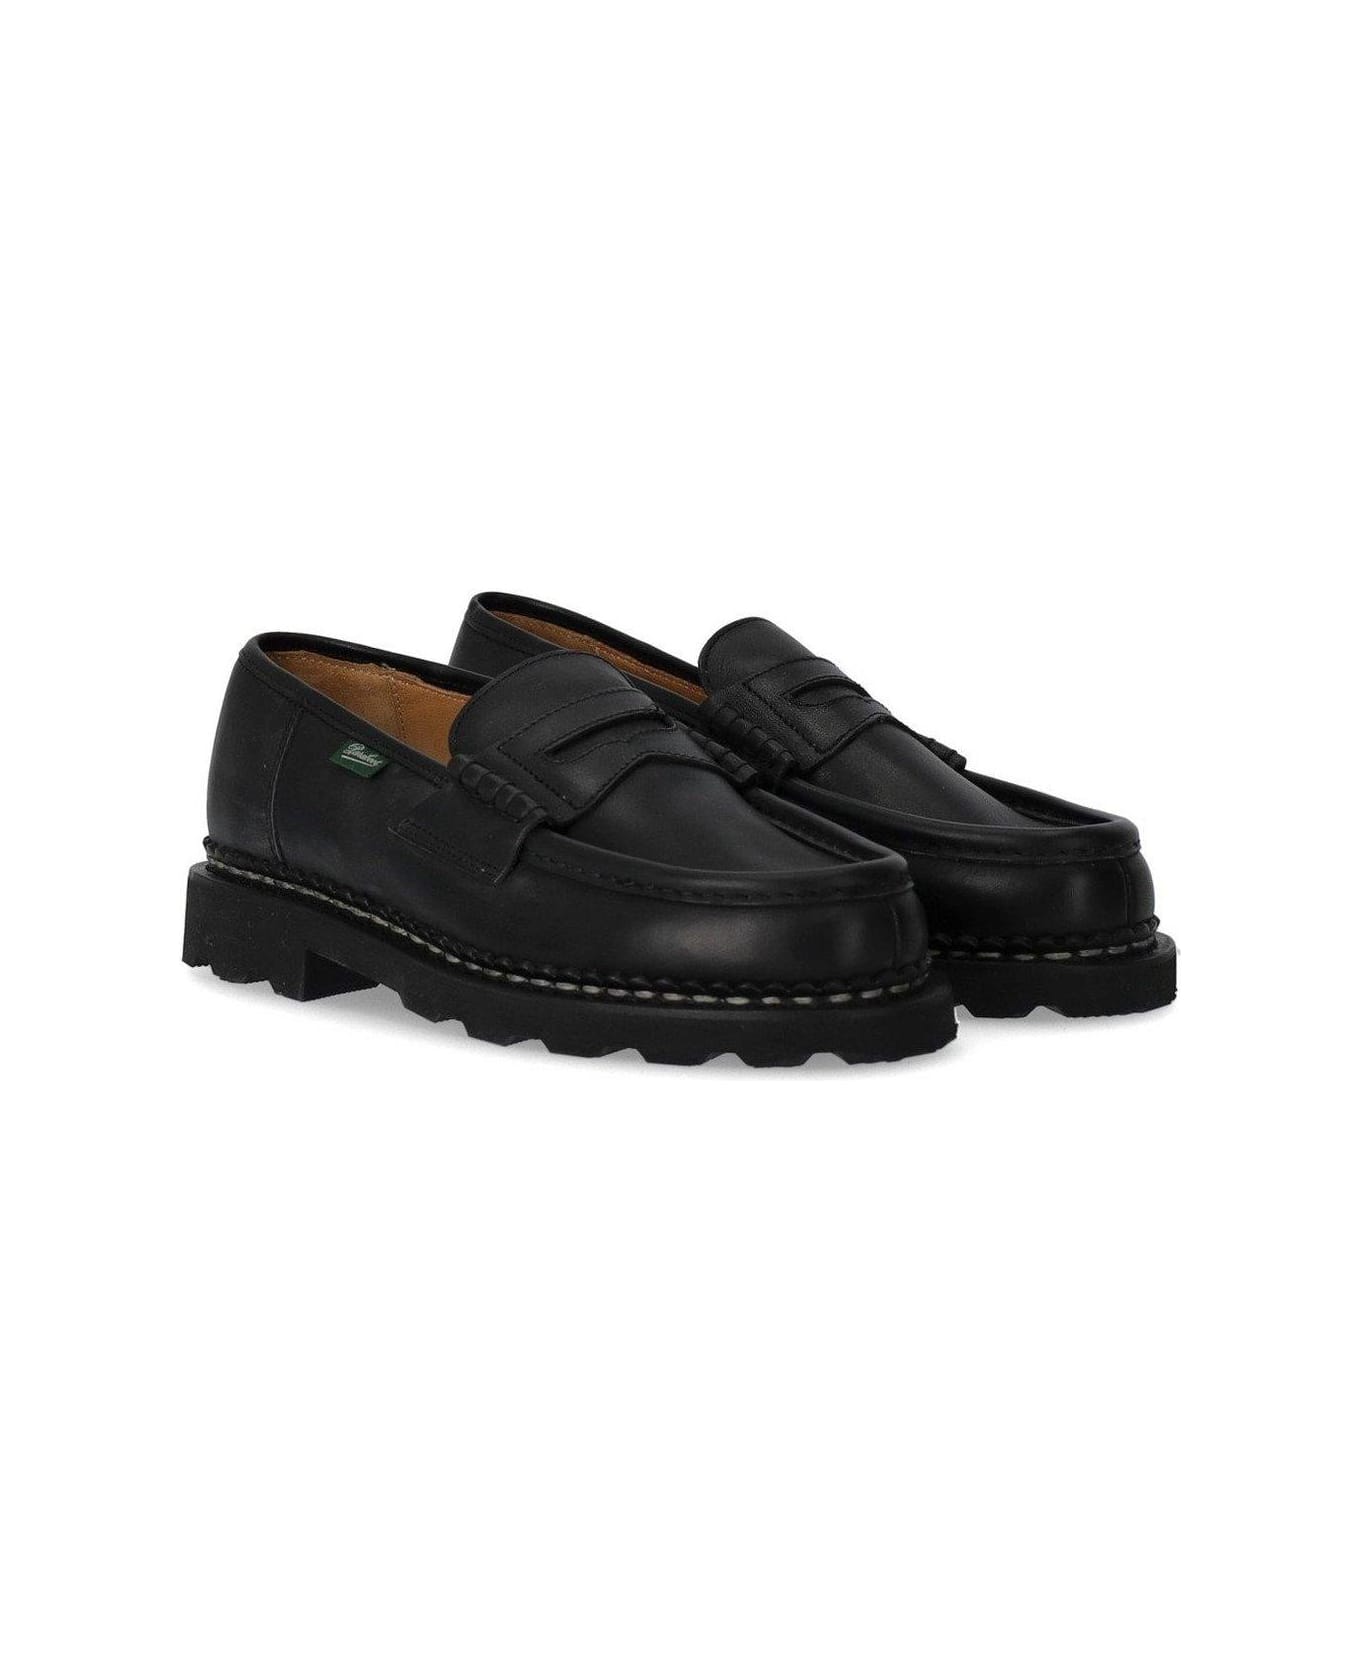 Paraboot Reims Marche Slip-on Loafers - Nero ローファー＆デッキシューズ